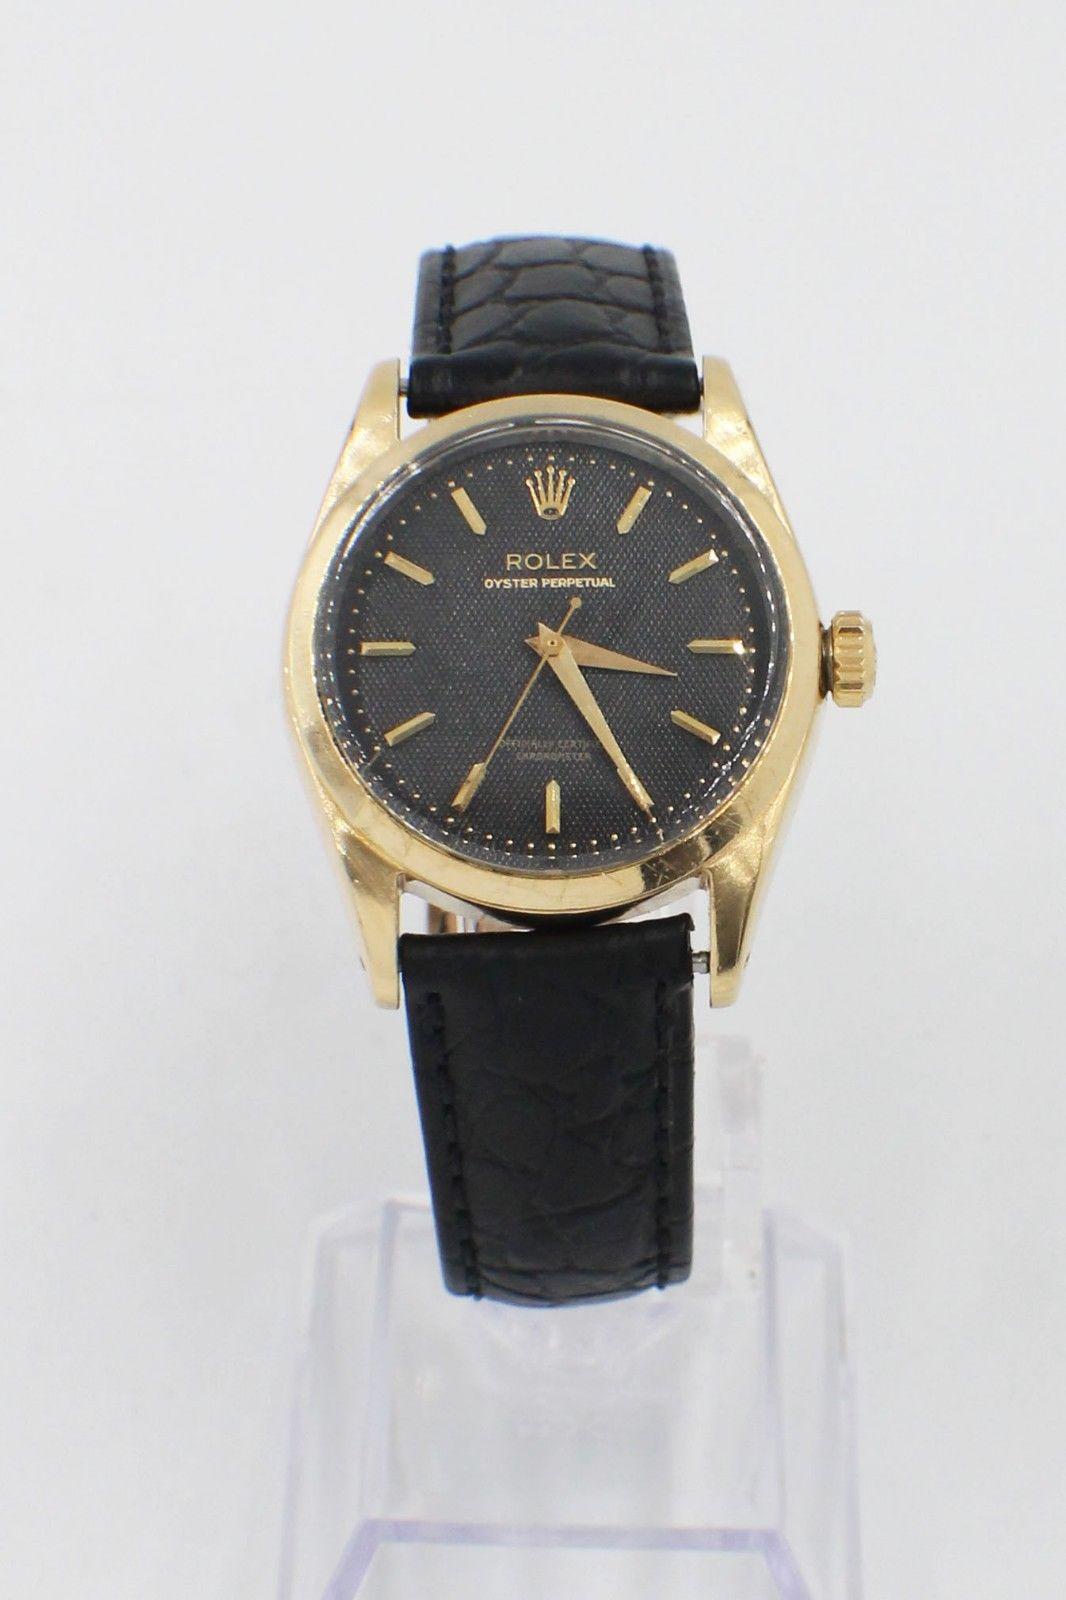 Vintage Rolex 6634 Oyster Perpetual 14 Karat Yellow Gold Capped, 1942 3